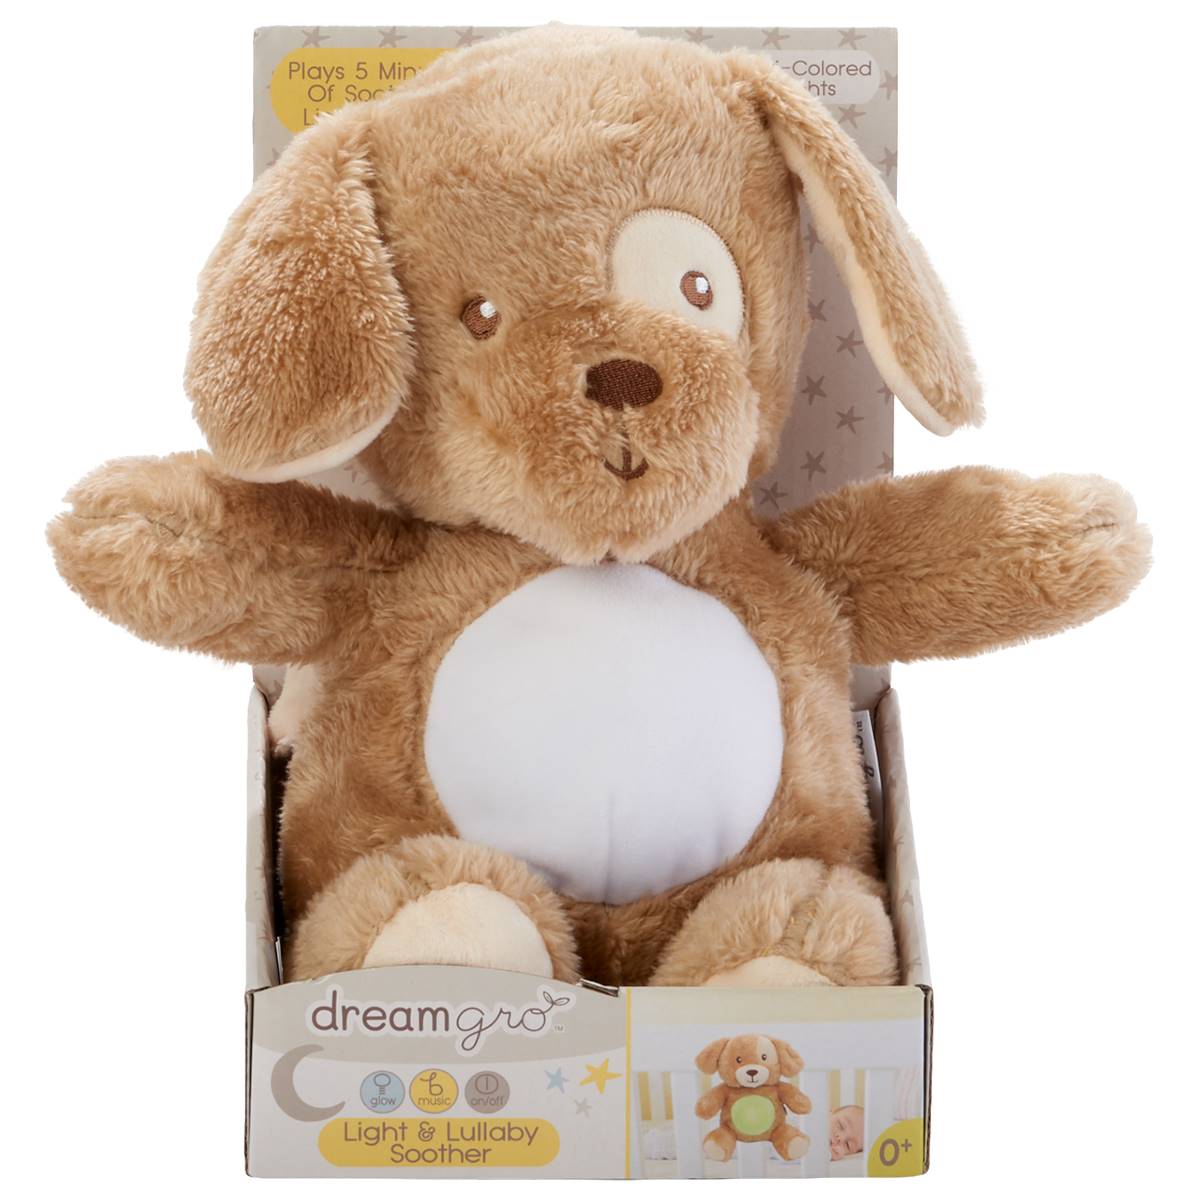 DreamGro(R) Plush Puppy Light & Lullaby Soother